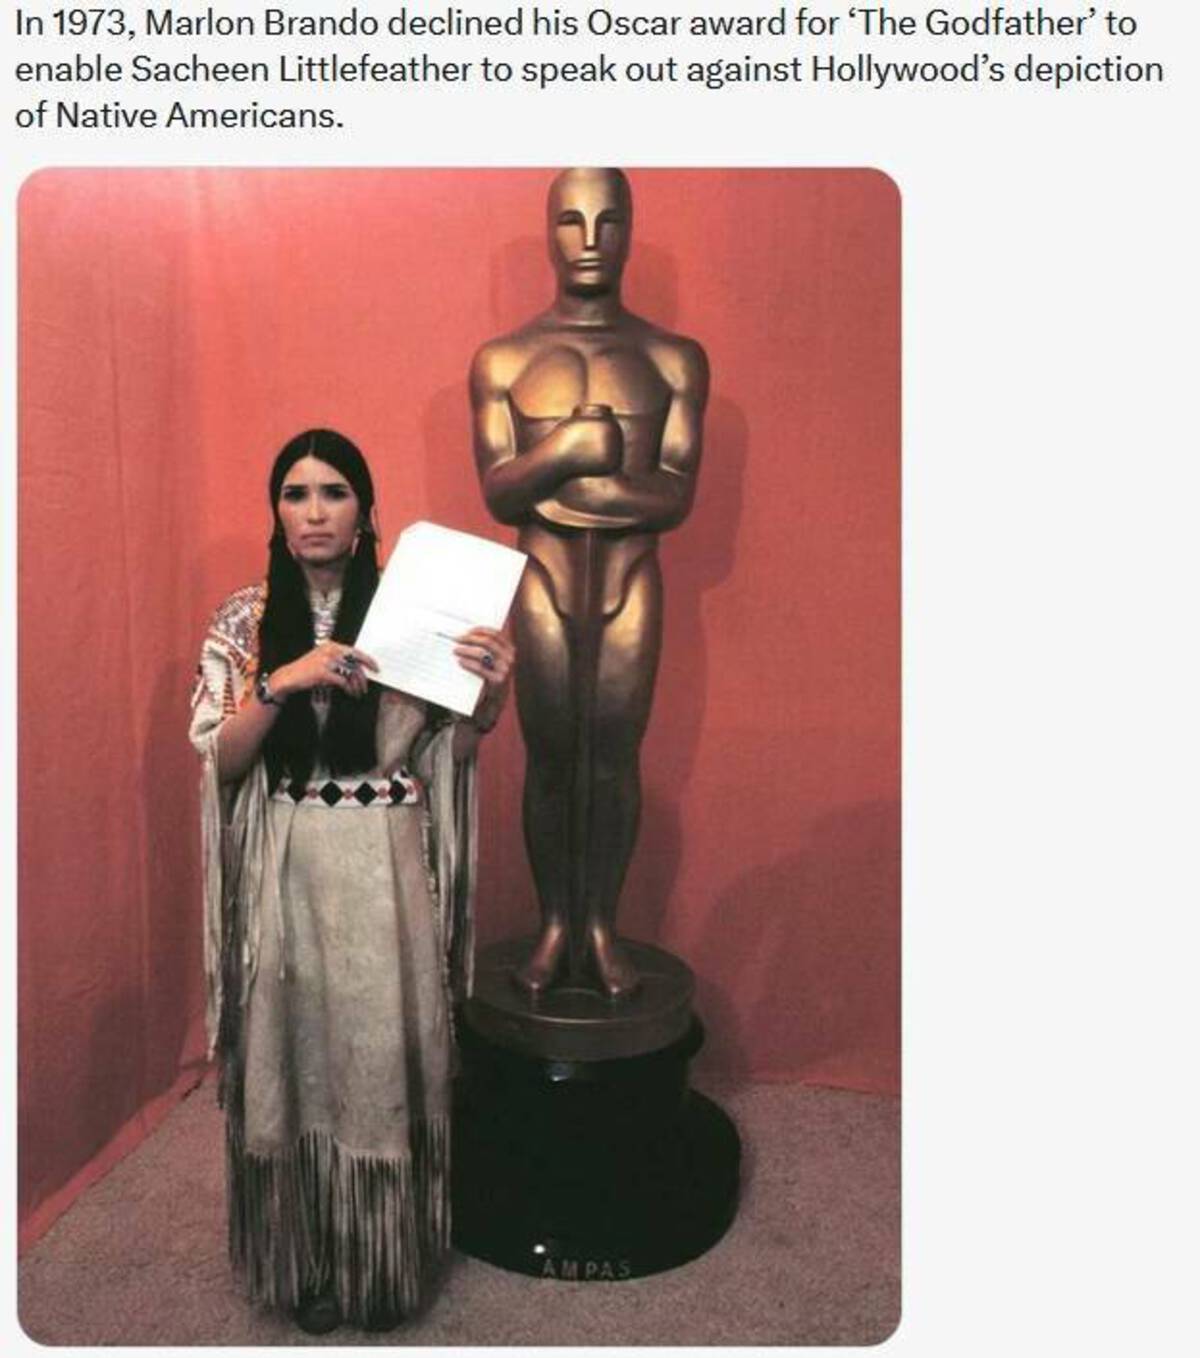 marlon brando oscar indian - In 1973, Marlon Brando declined his Oscar award for 'The Godfather' to enable Sacheen Littlefeather to speak out against Hollywood's depiction of Native Americans. Ampas